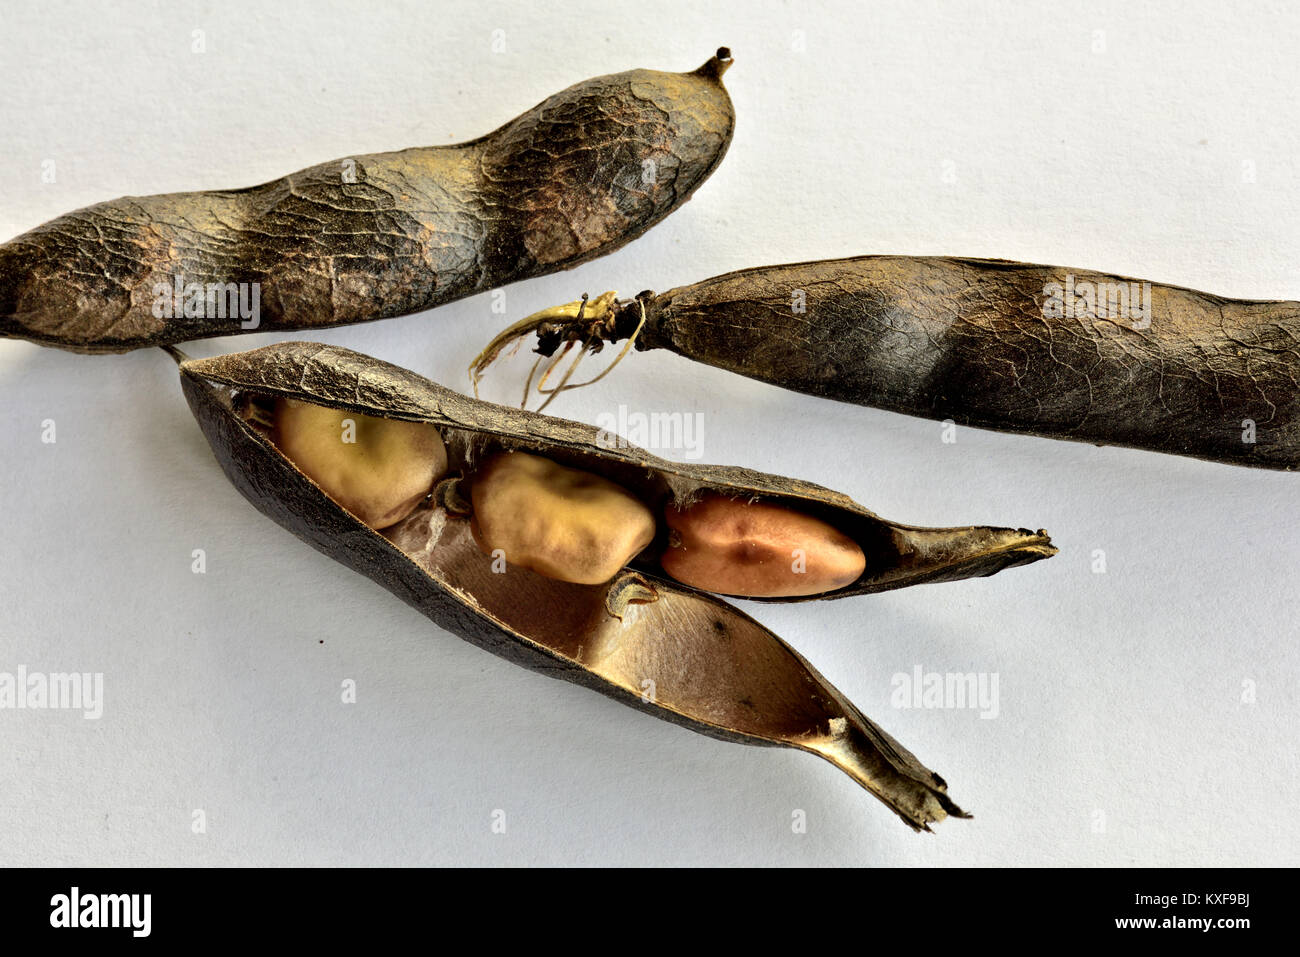 Dried broad beans in pod or fava bean, a major food staple in some countries Stock Photo